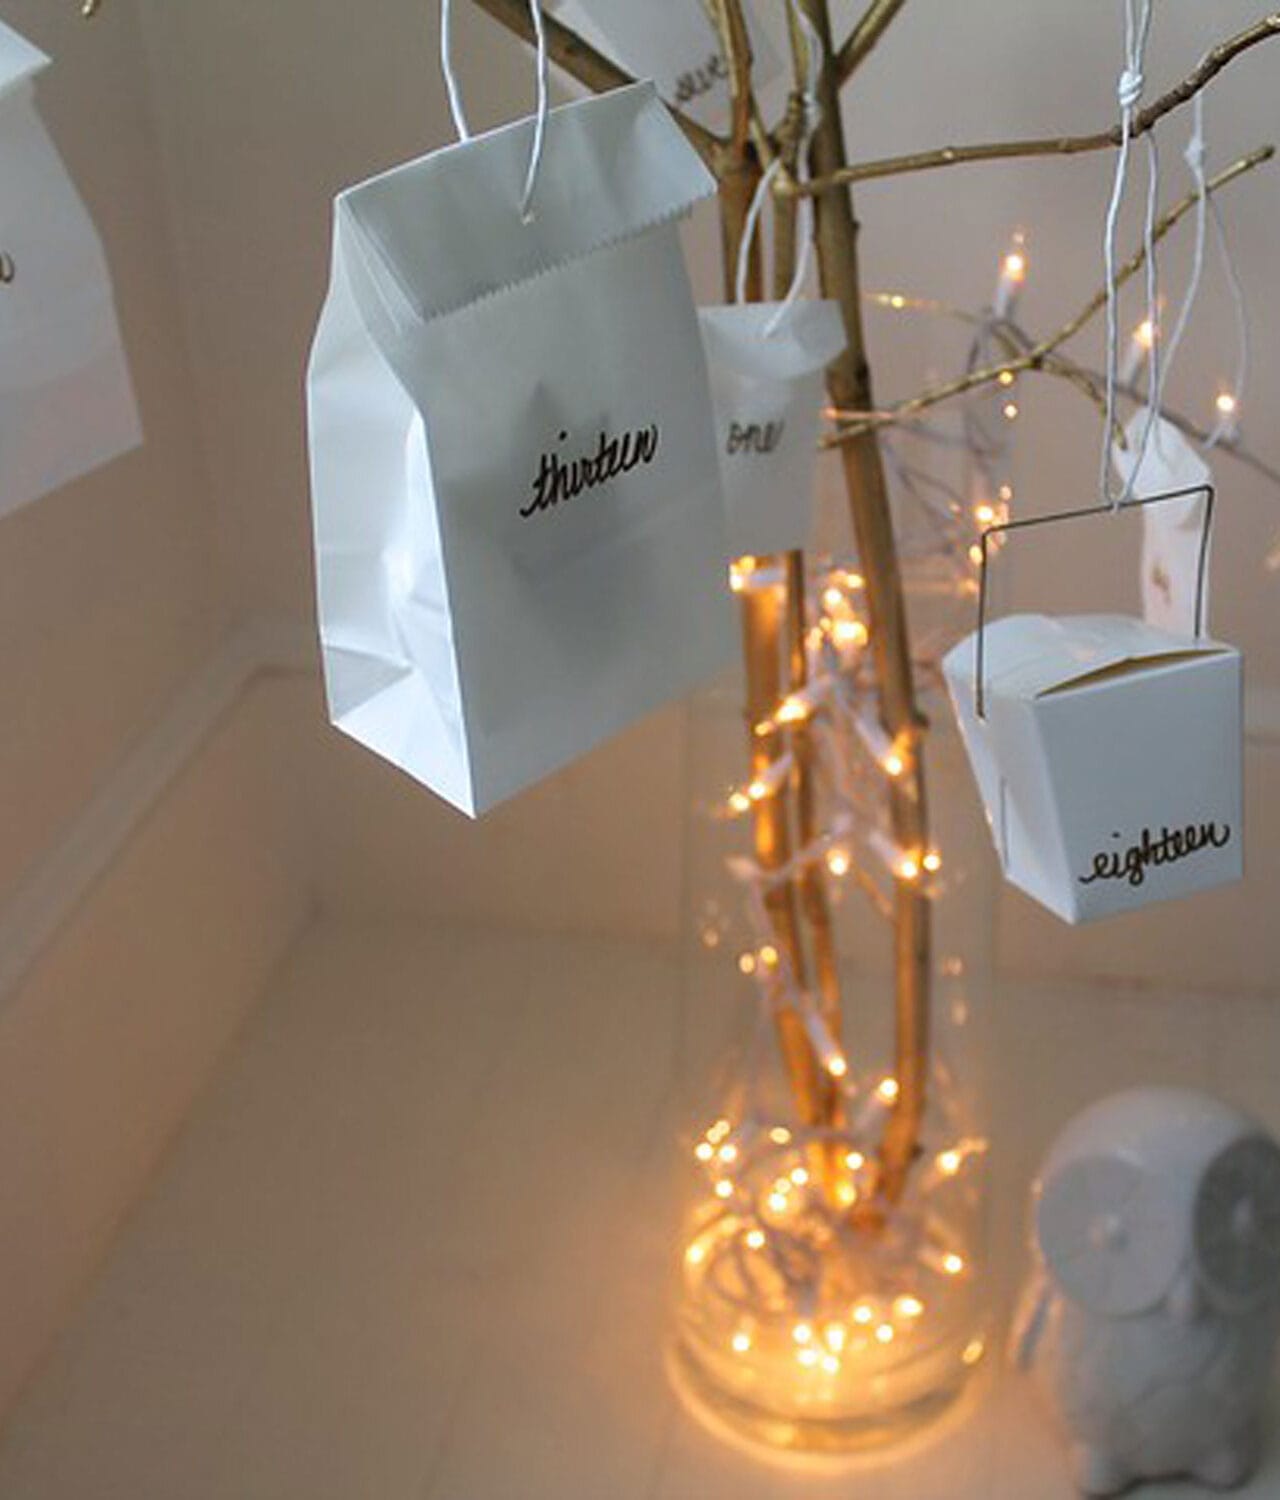 Advent Calendar Using Take-Out Containers and Bags